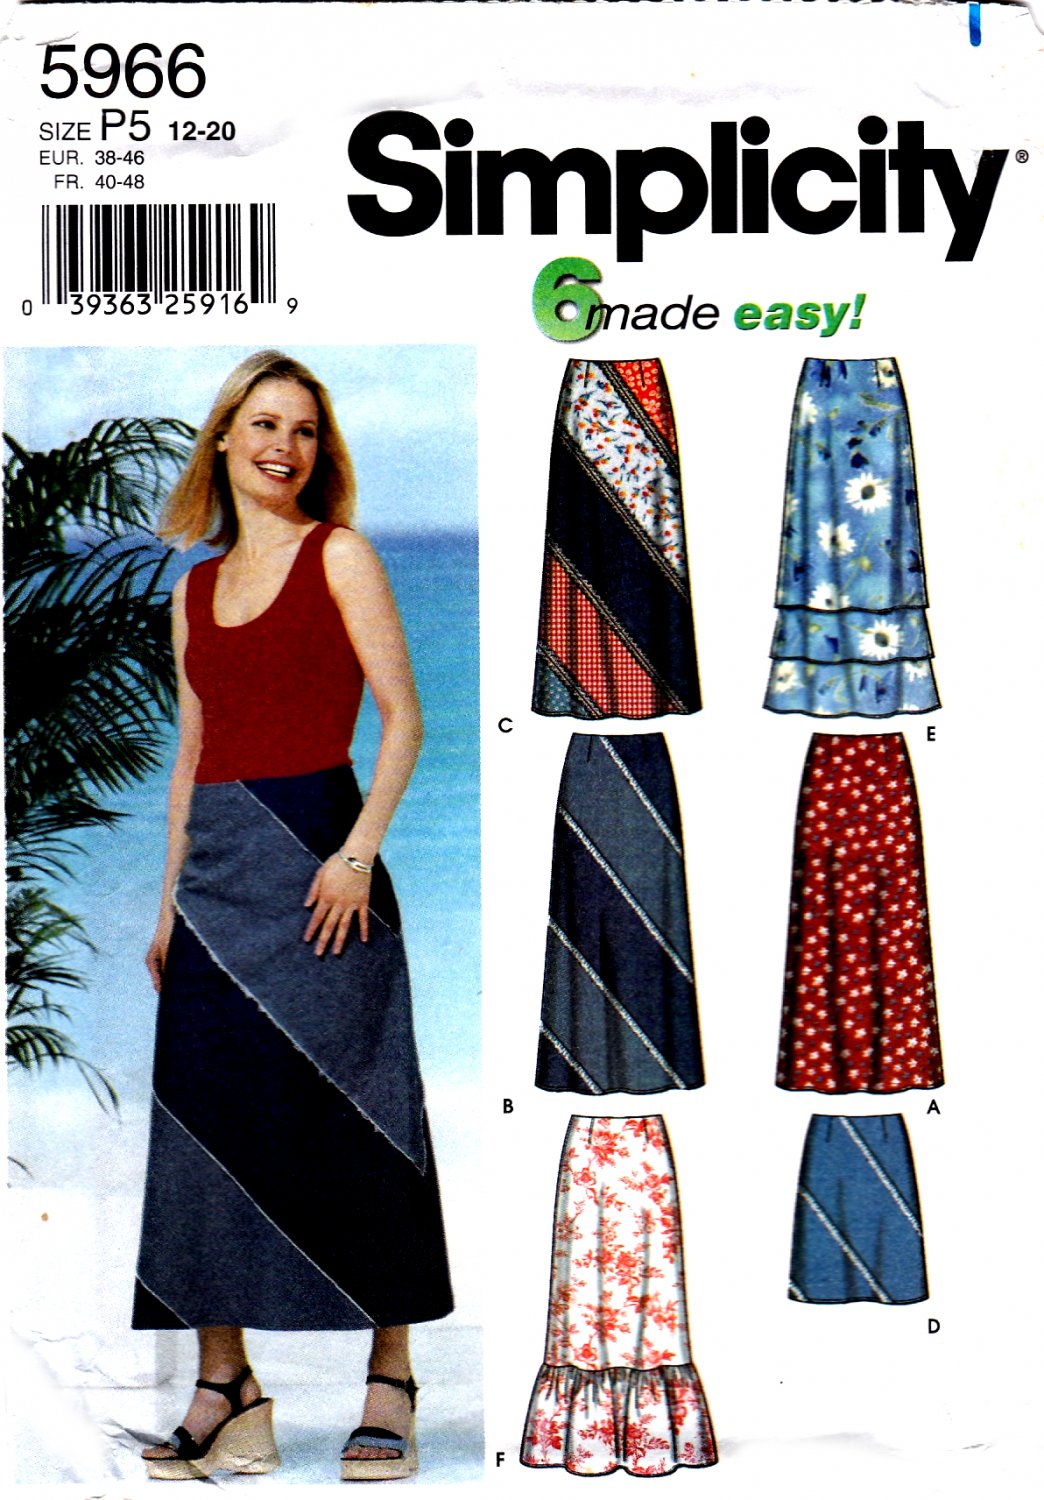 Simplicity 5966 Misses Skirts In Two Lengths Sewing Pattern Sizes 12-20